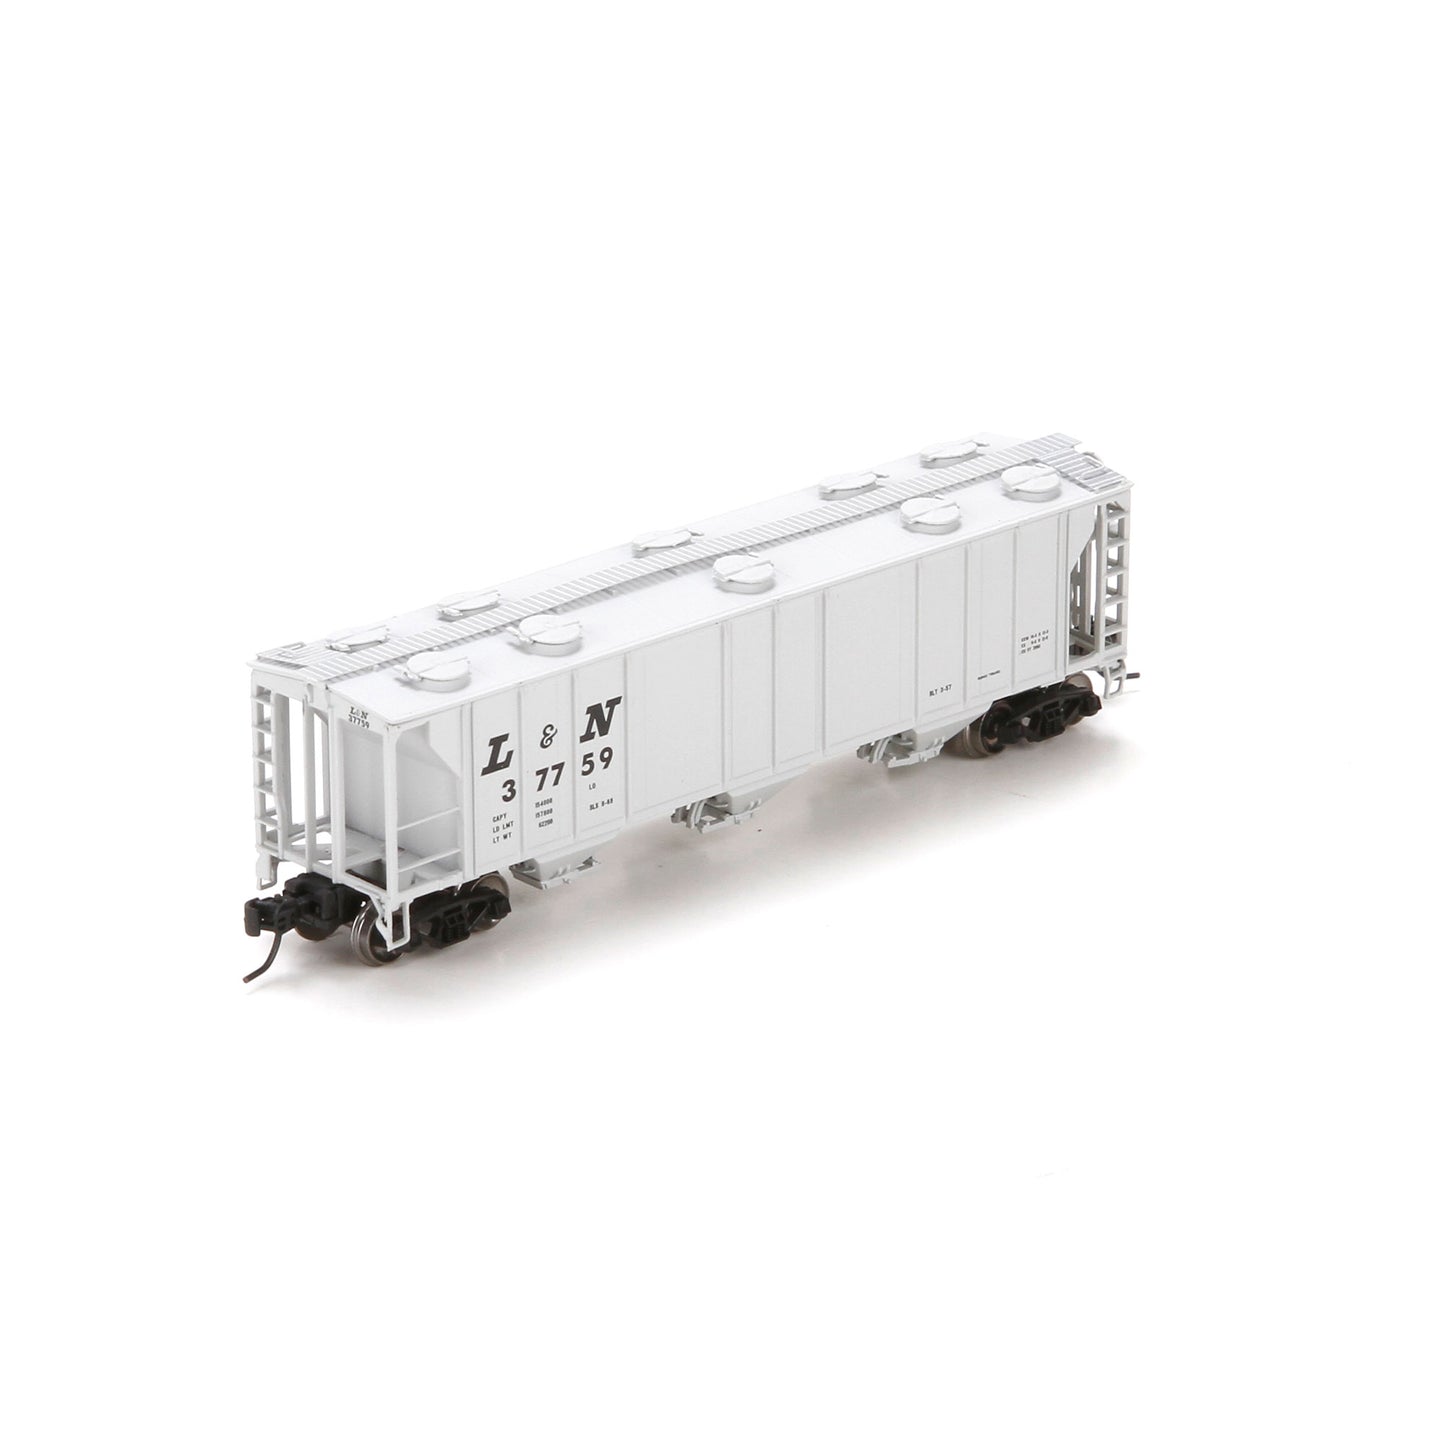 Athearn 23863 N Louisville and Nashville PS-2 2893 3-Bay Covered Hopper #37759